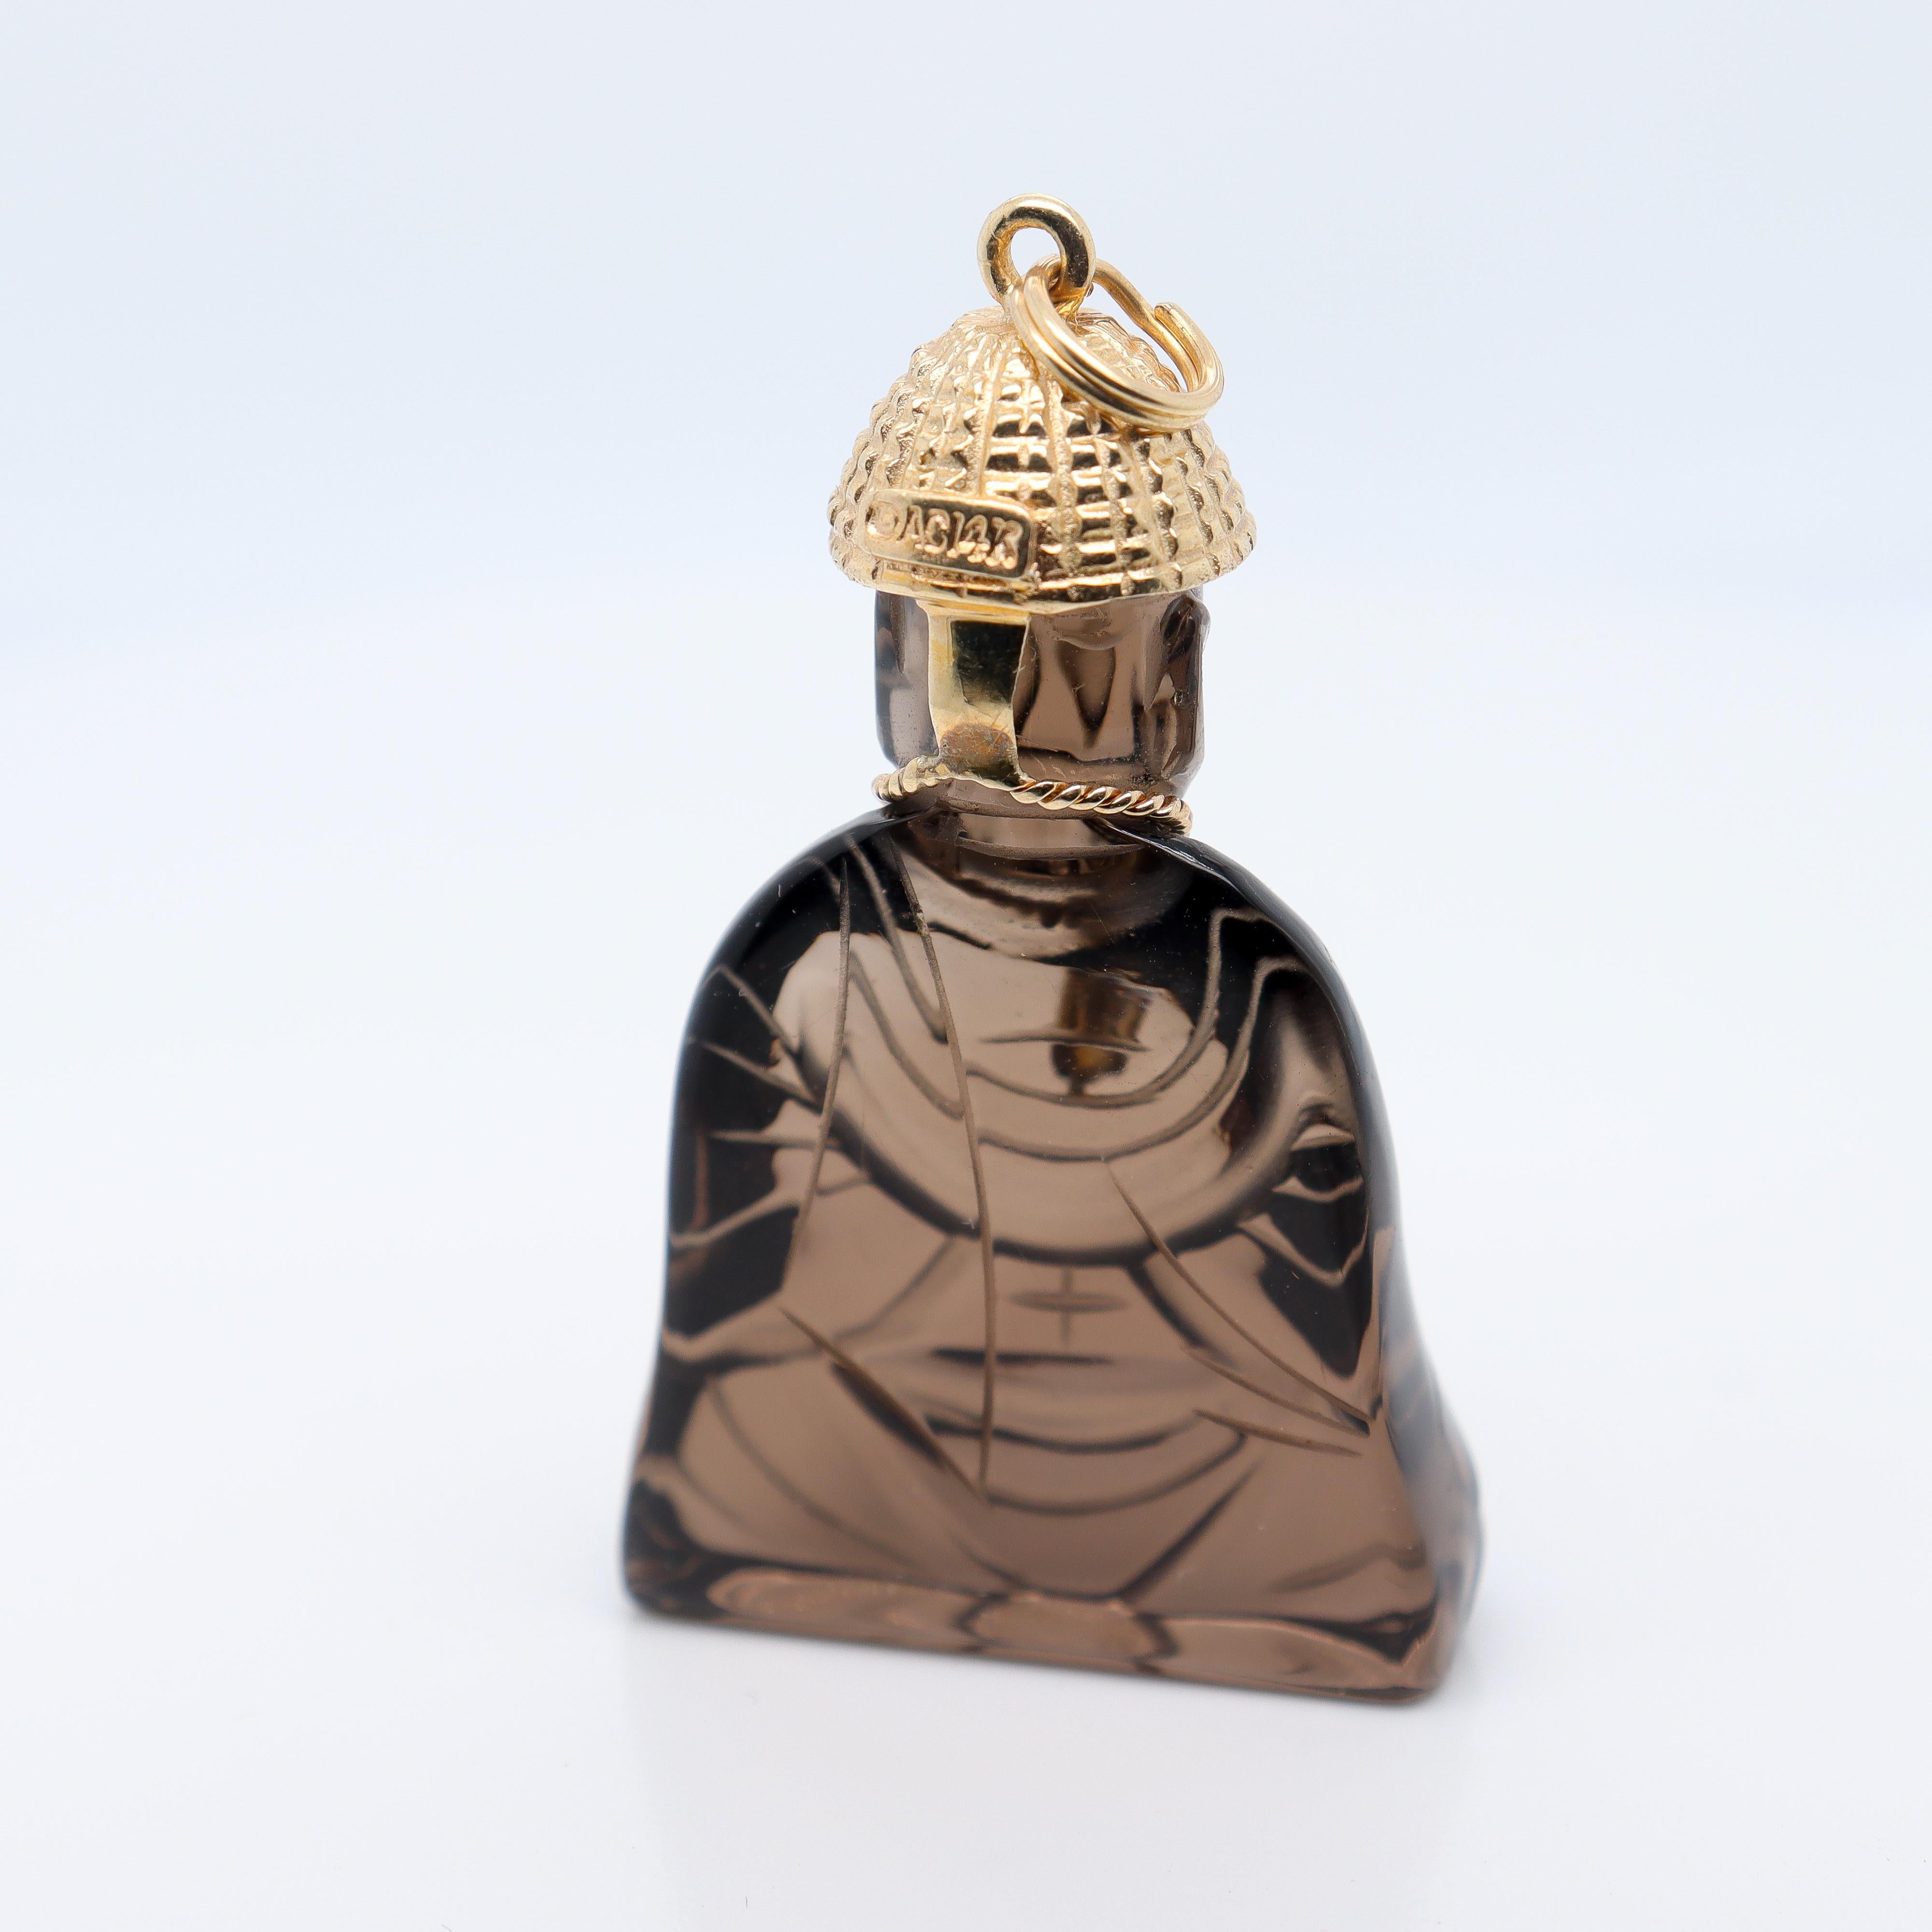 Retro Signed 14k Gold, Smoky Quartz, & Seed Pearl Carved Buddha Charm or Pendant For Sale 5